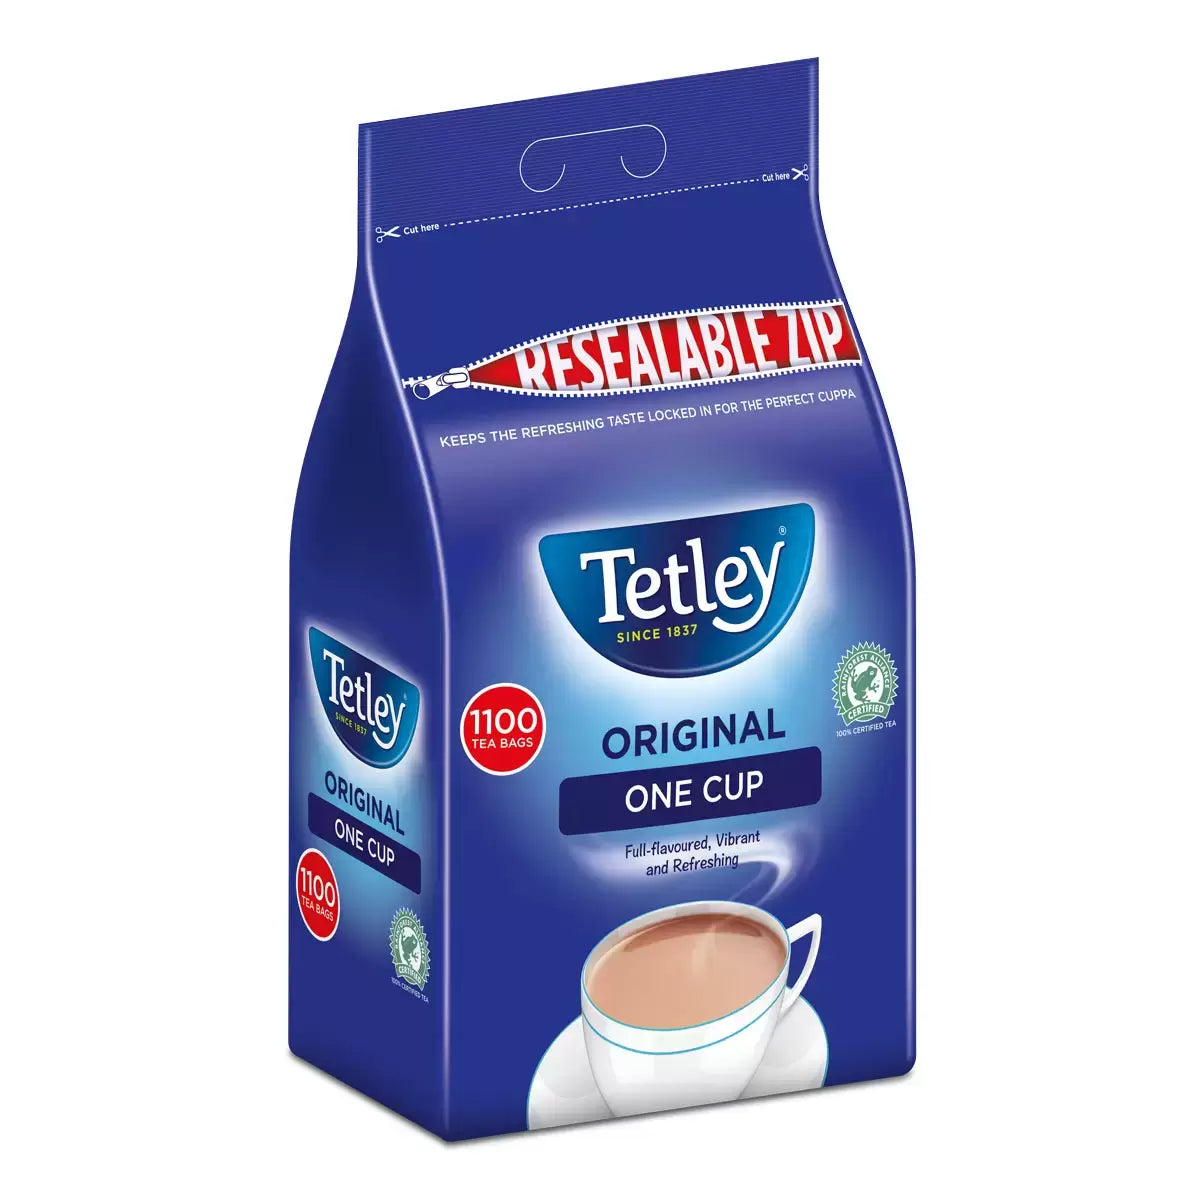 Tetley Tea: Cup Tea Bags For Caterers - 1100 Bags